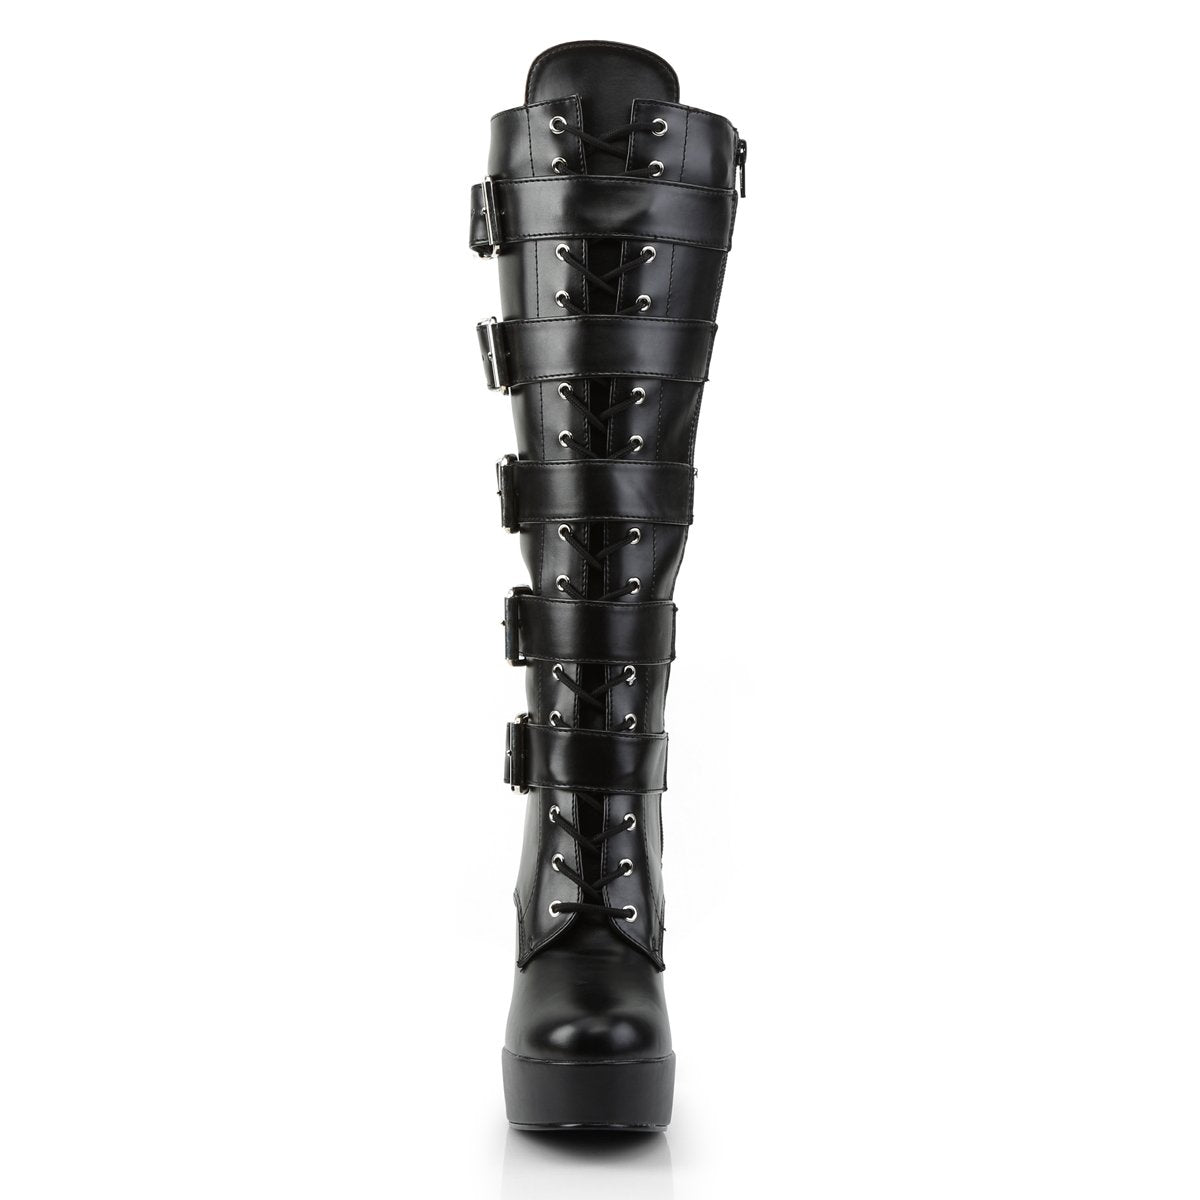 Pleaser USA Electra 2042 Platform Boot with 5 Buckle Detail & Full Inner Side Zipper